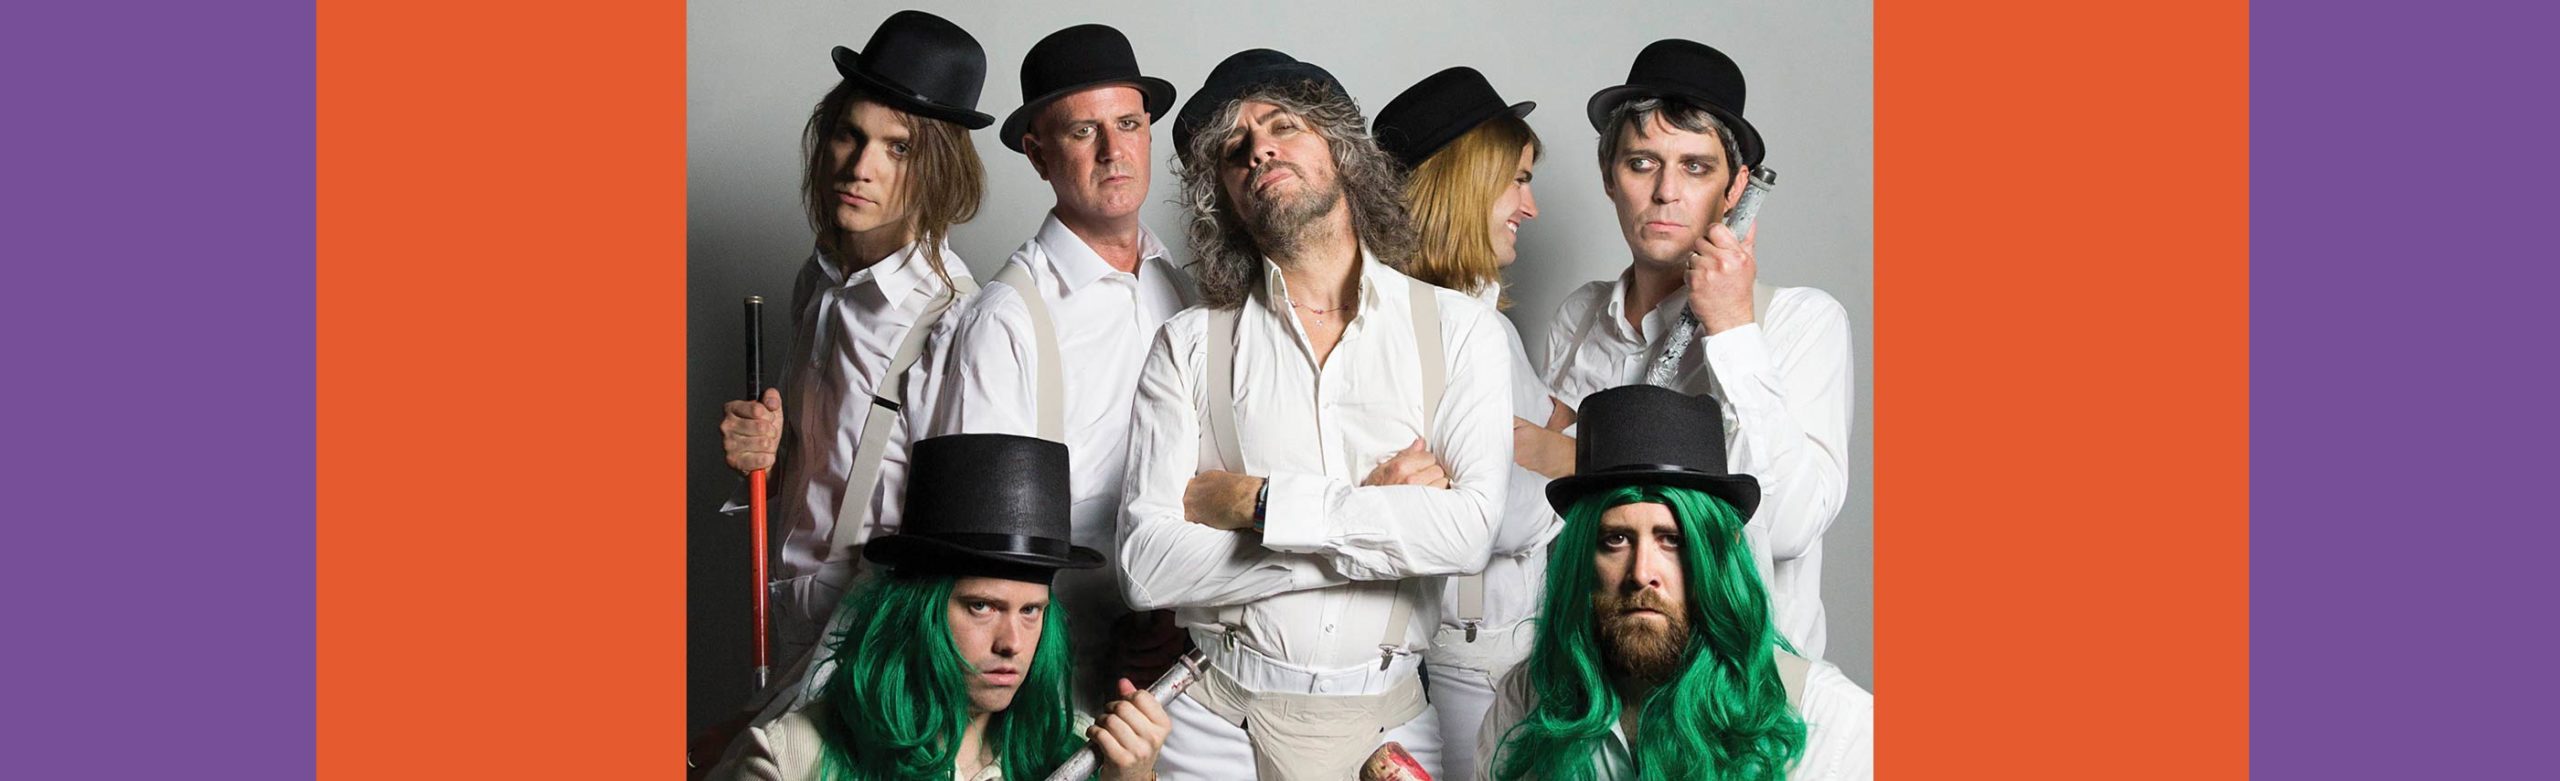 Event Info: Flaming Lips at KettleHouse Amphitheater 2018 Image